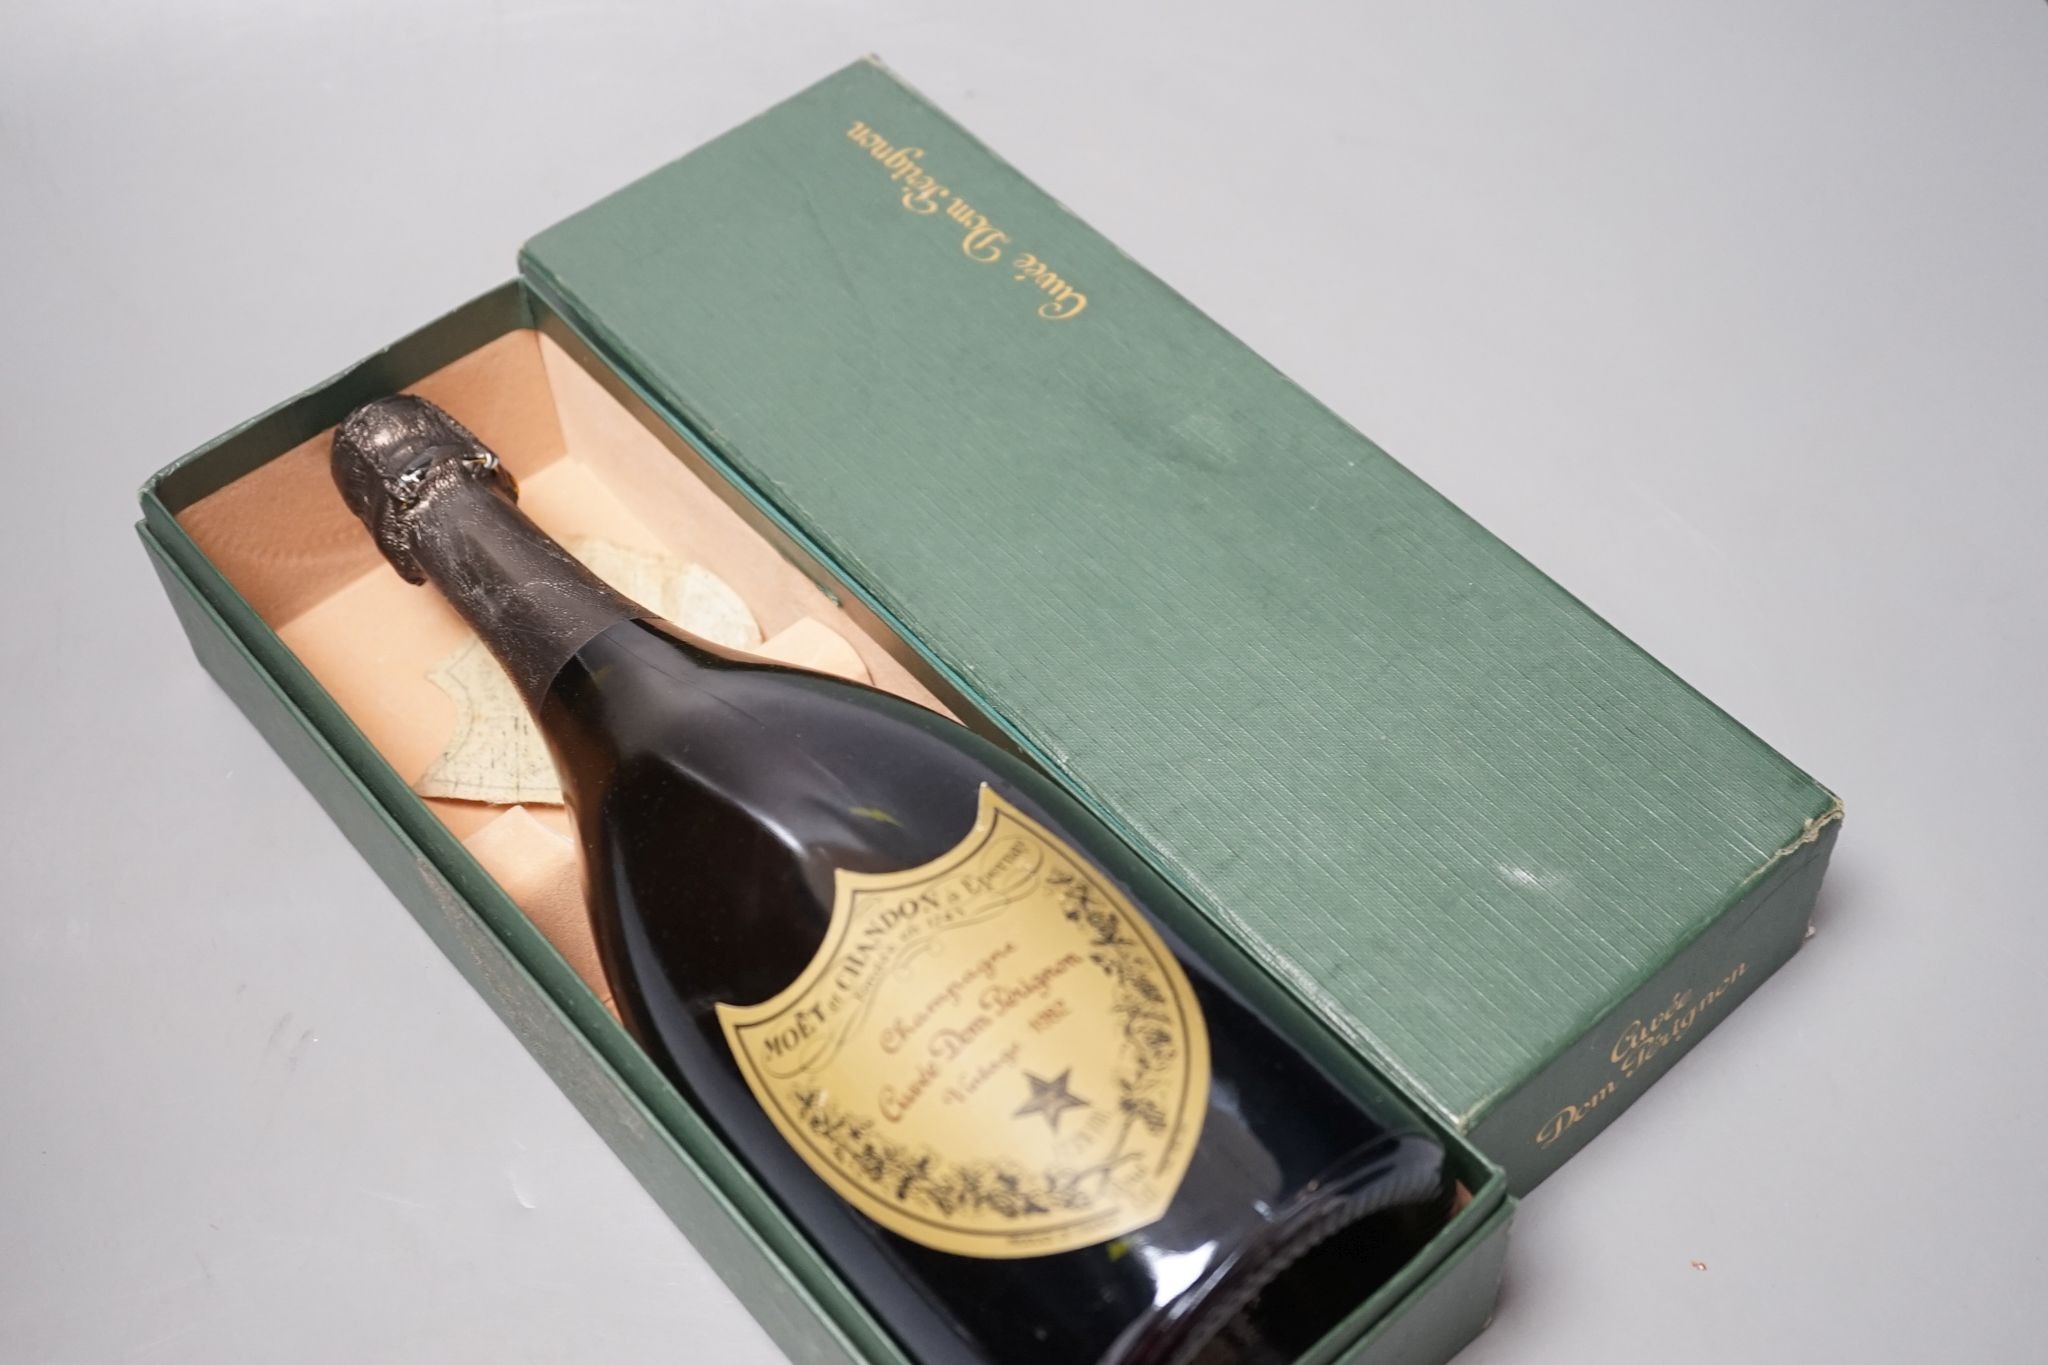 One boxed bottle of Dom Perignon vintage 1982 Champagne.